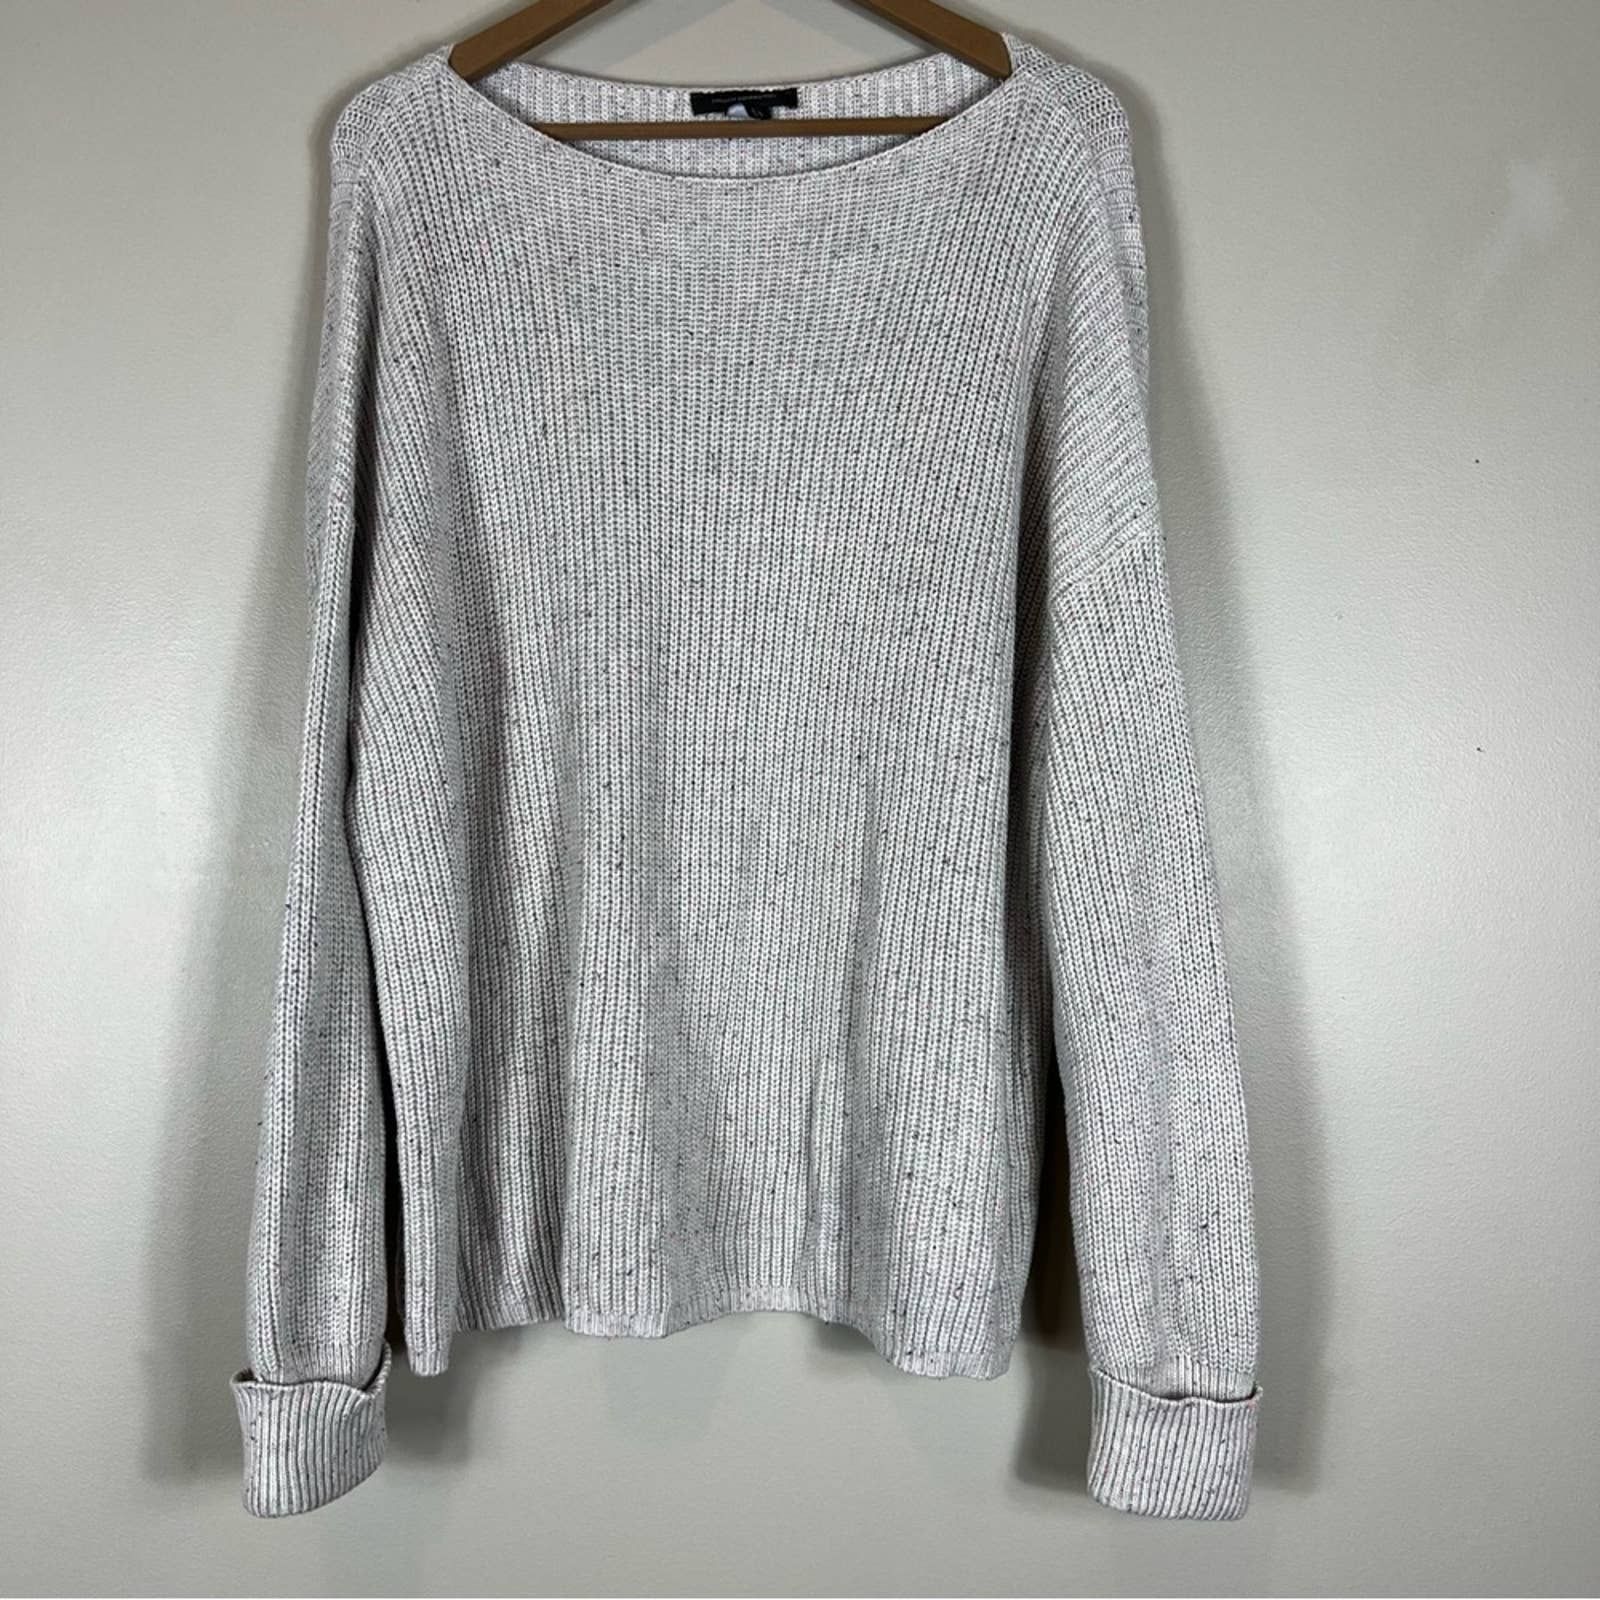 French Connection French Connection Flecked Cream Millie Mozart Sweater Size M / US 6-8 / IT 42-44 - 2 Preview